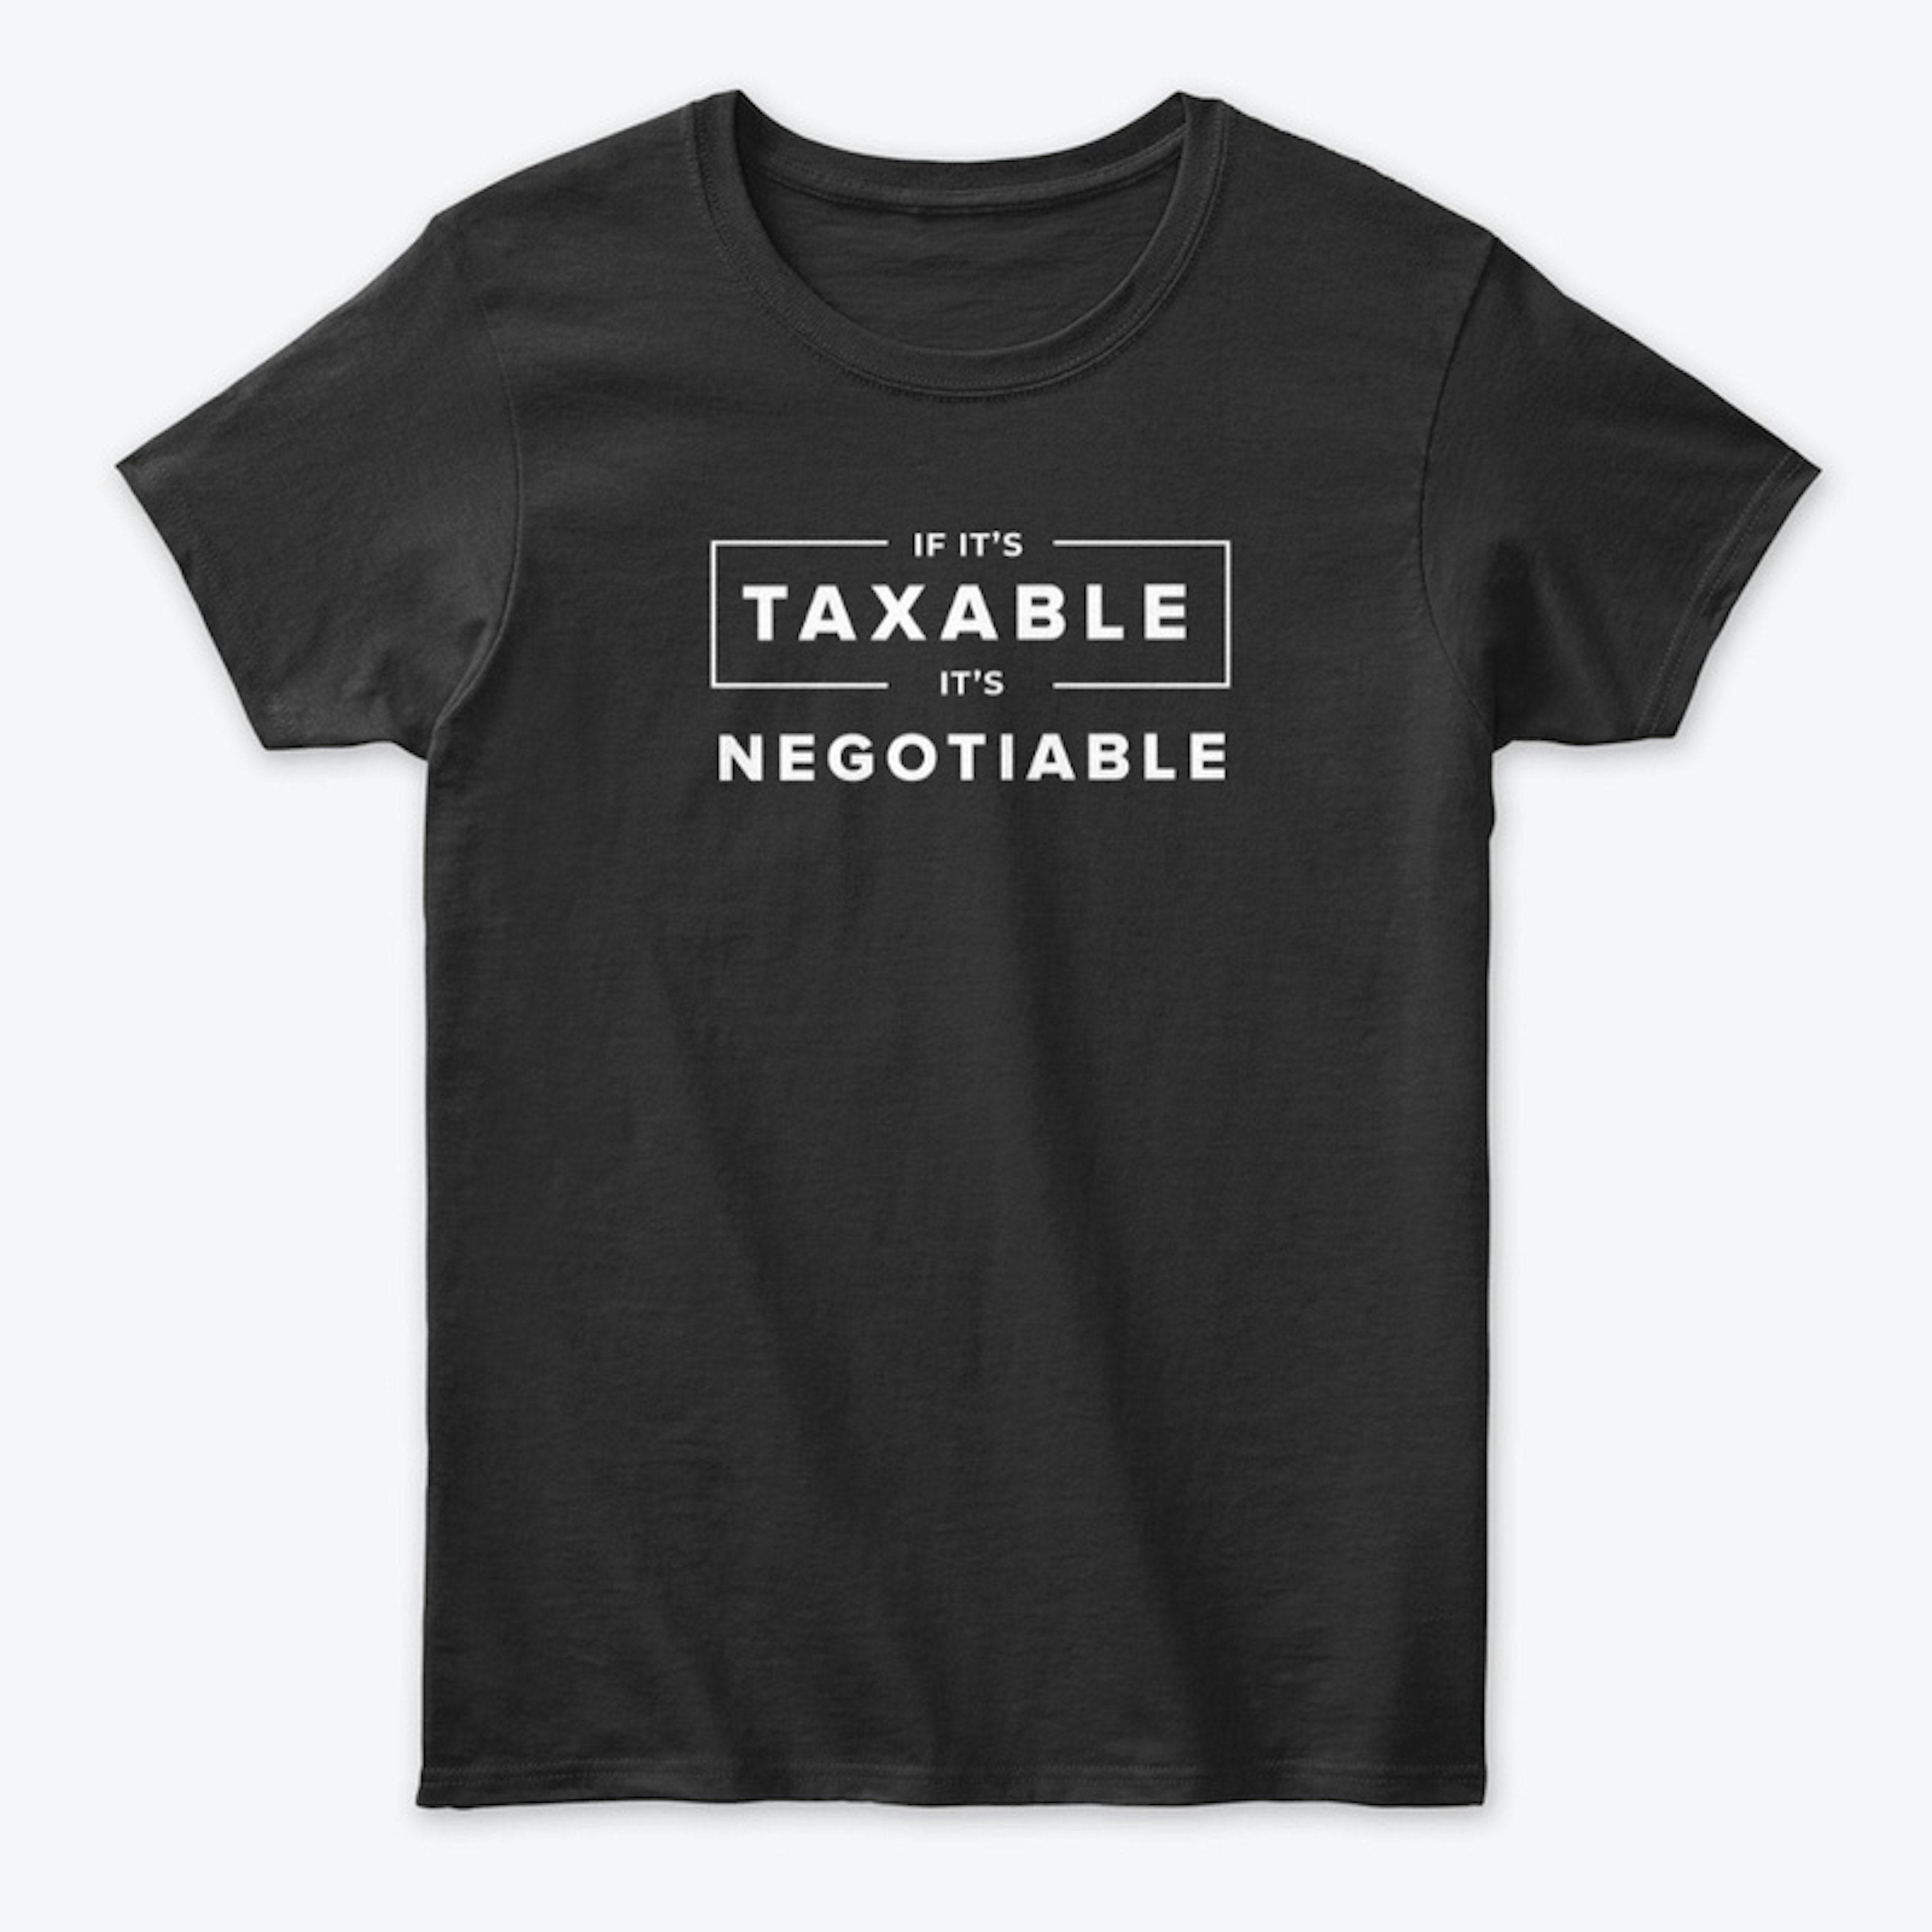 If It's Taxable, It's Negotiable